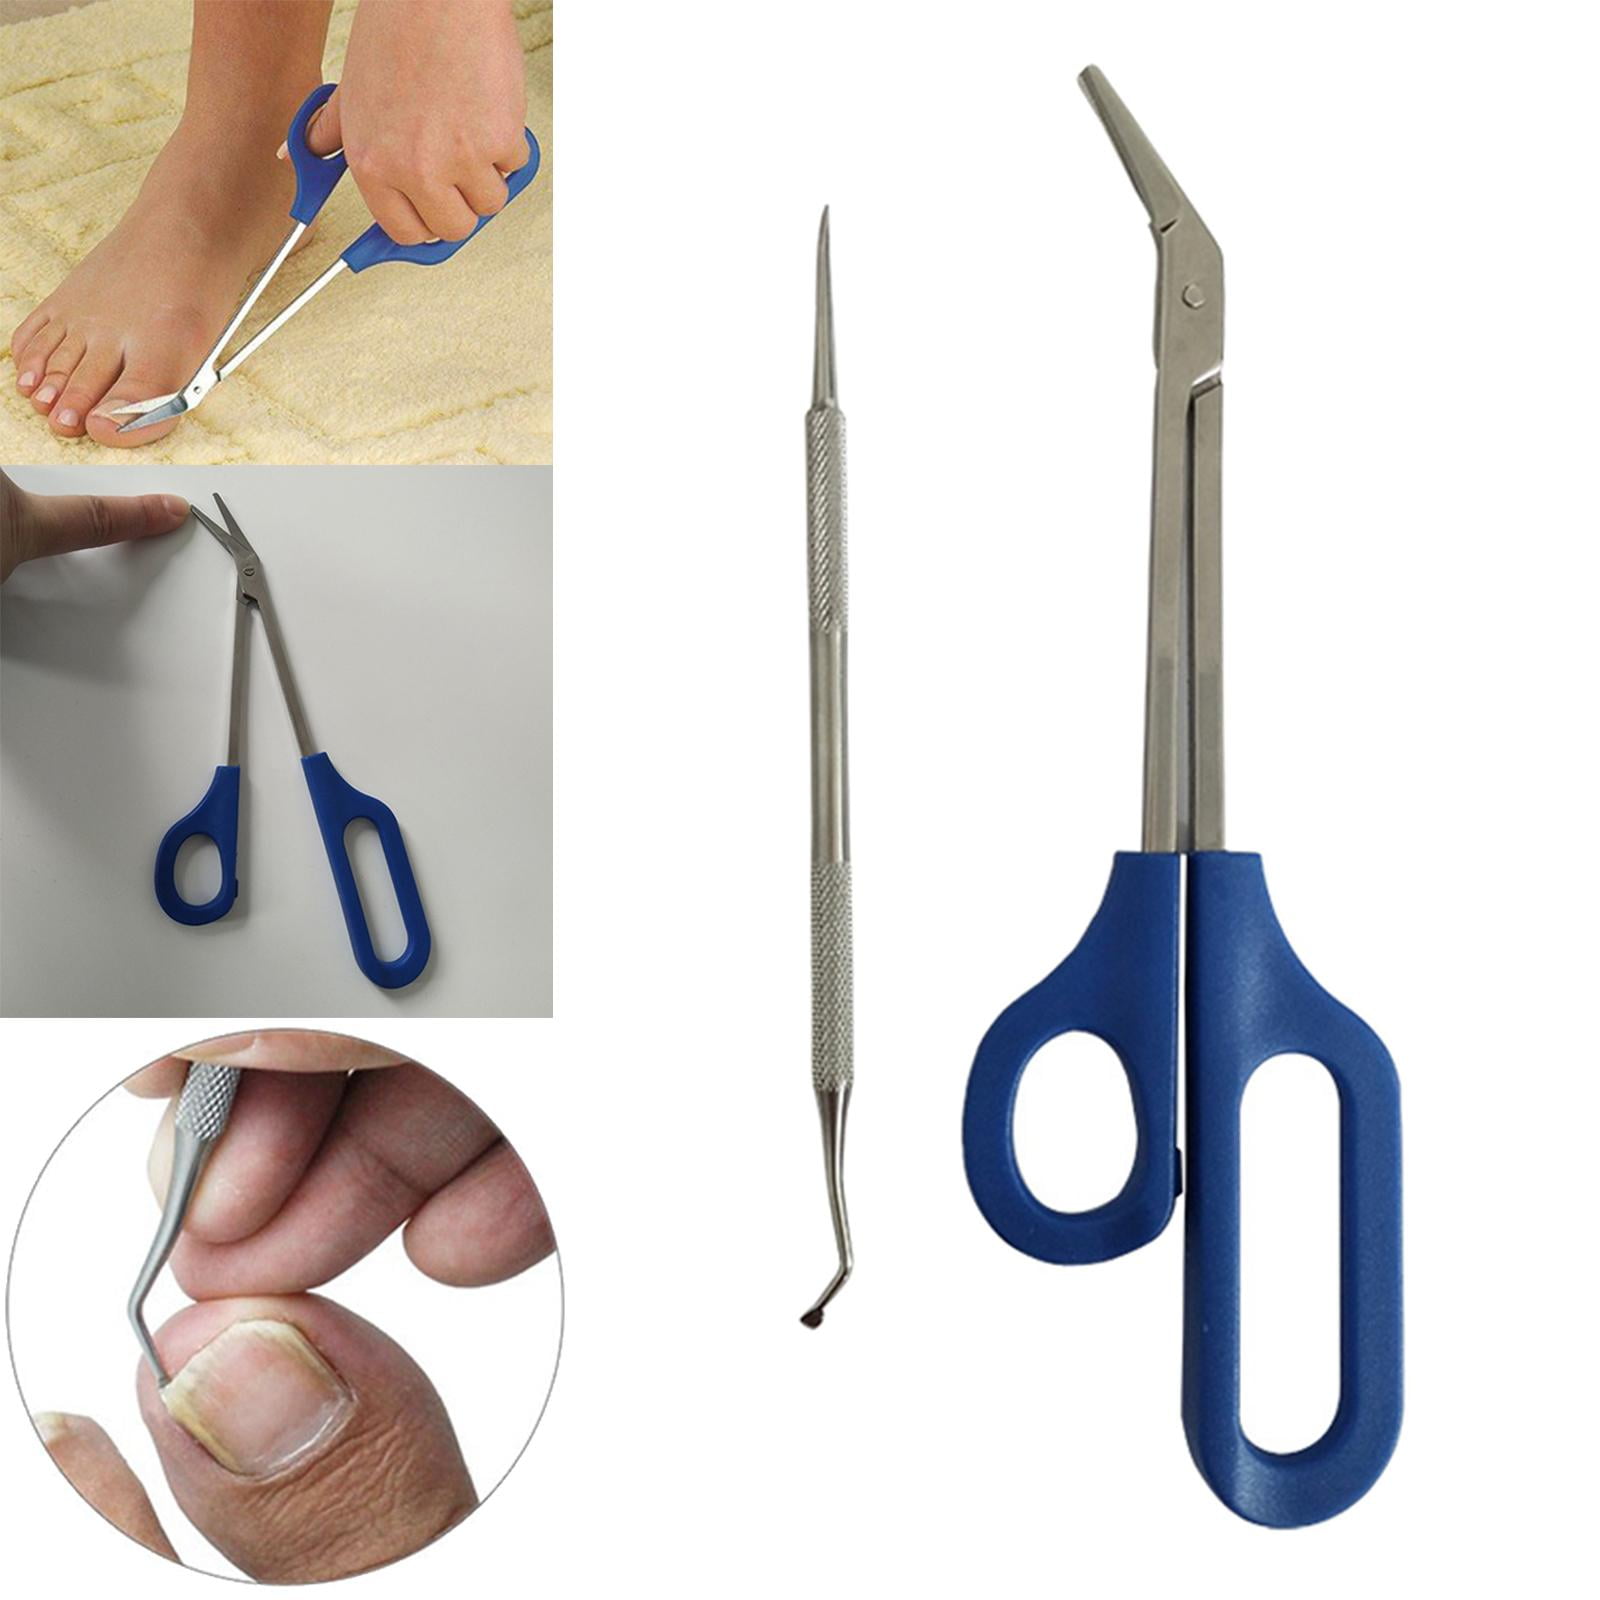 21cm Easy Grip Long Handled Toenail Scissors Clippers Nippers Fingernail  Clipper Nail Supplies - Clippers & Trimmers - AliExpress